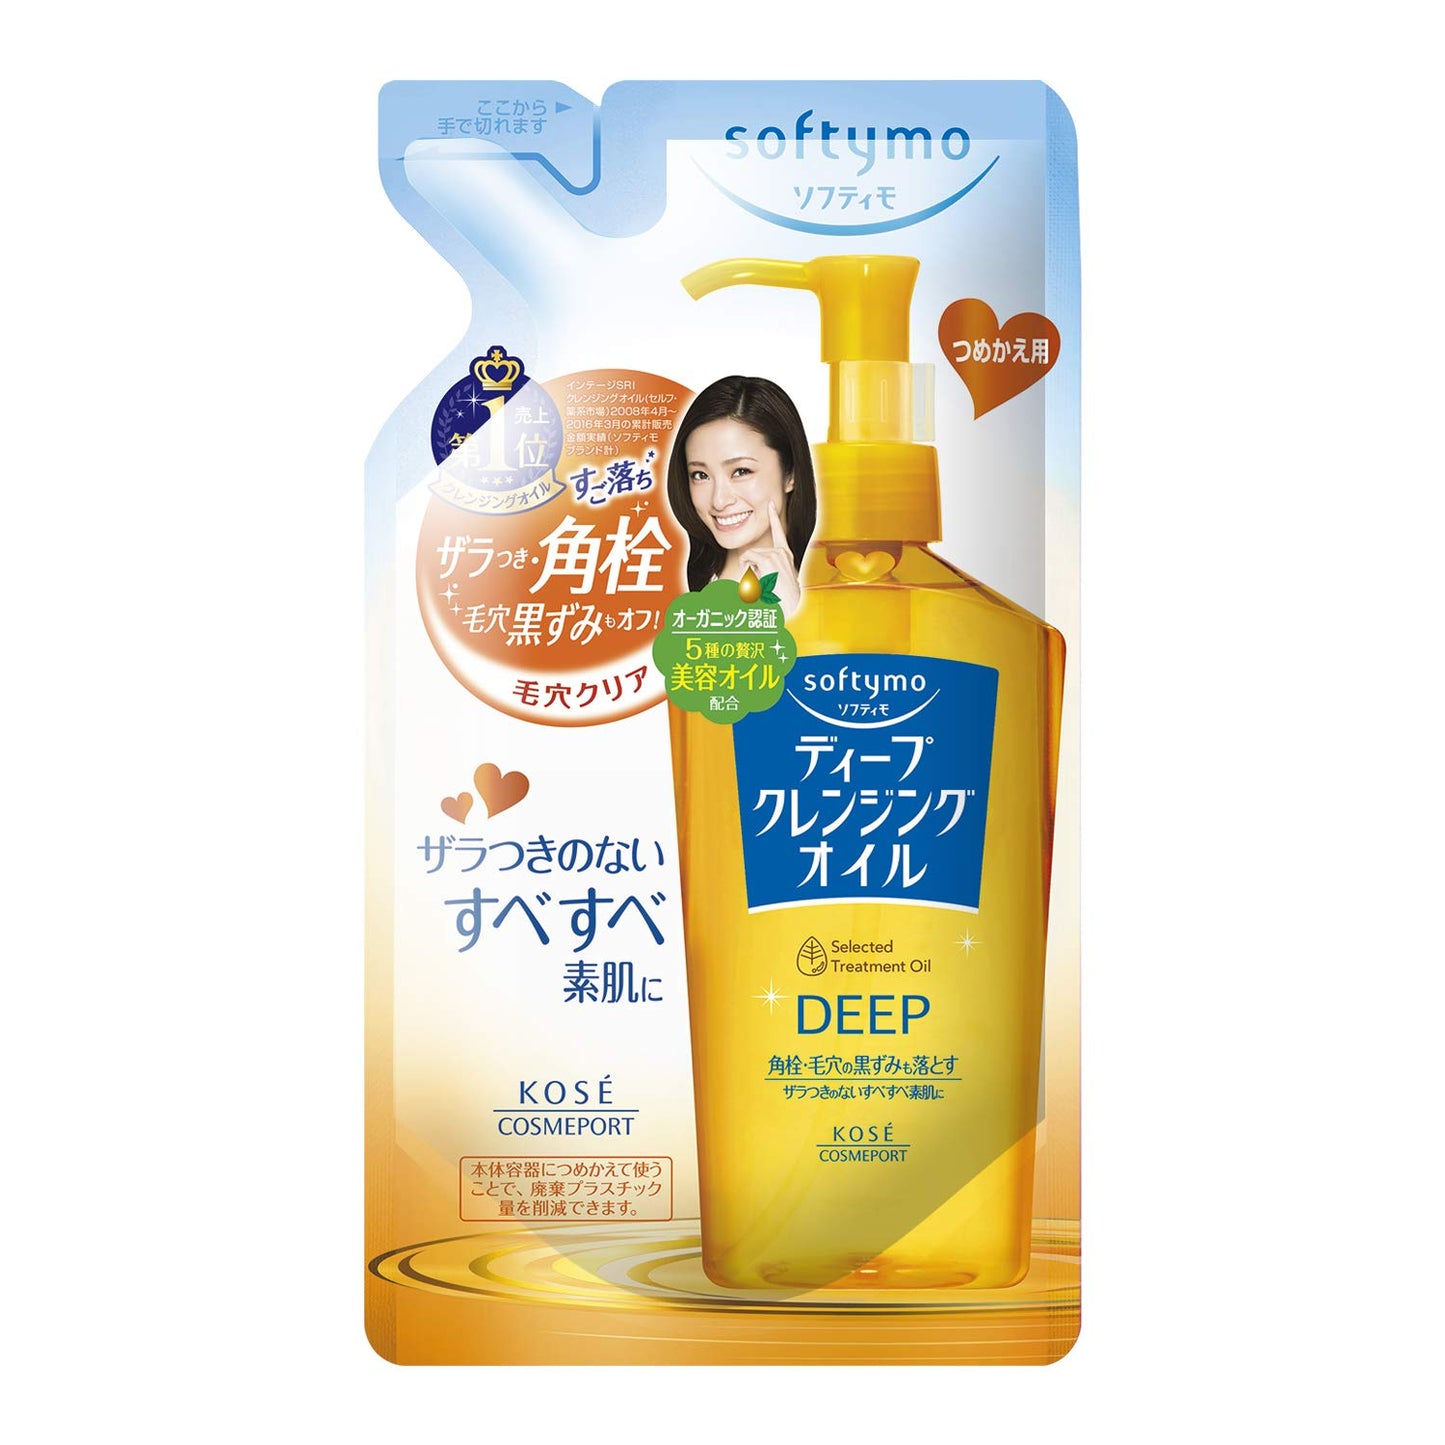 KOSE SOFTYMO DP CLEANSING OIL REFILL